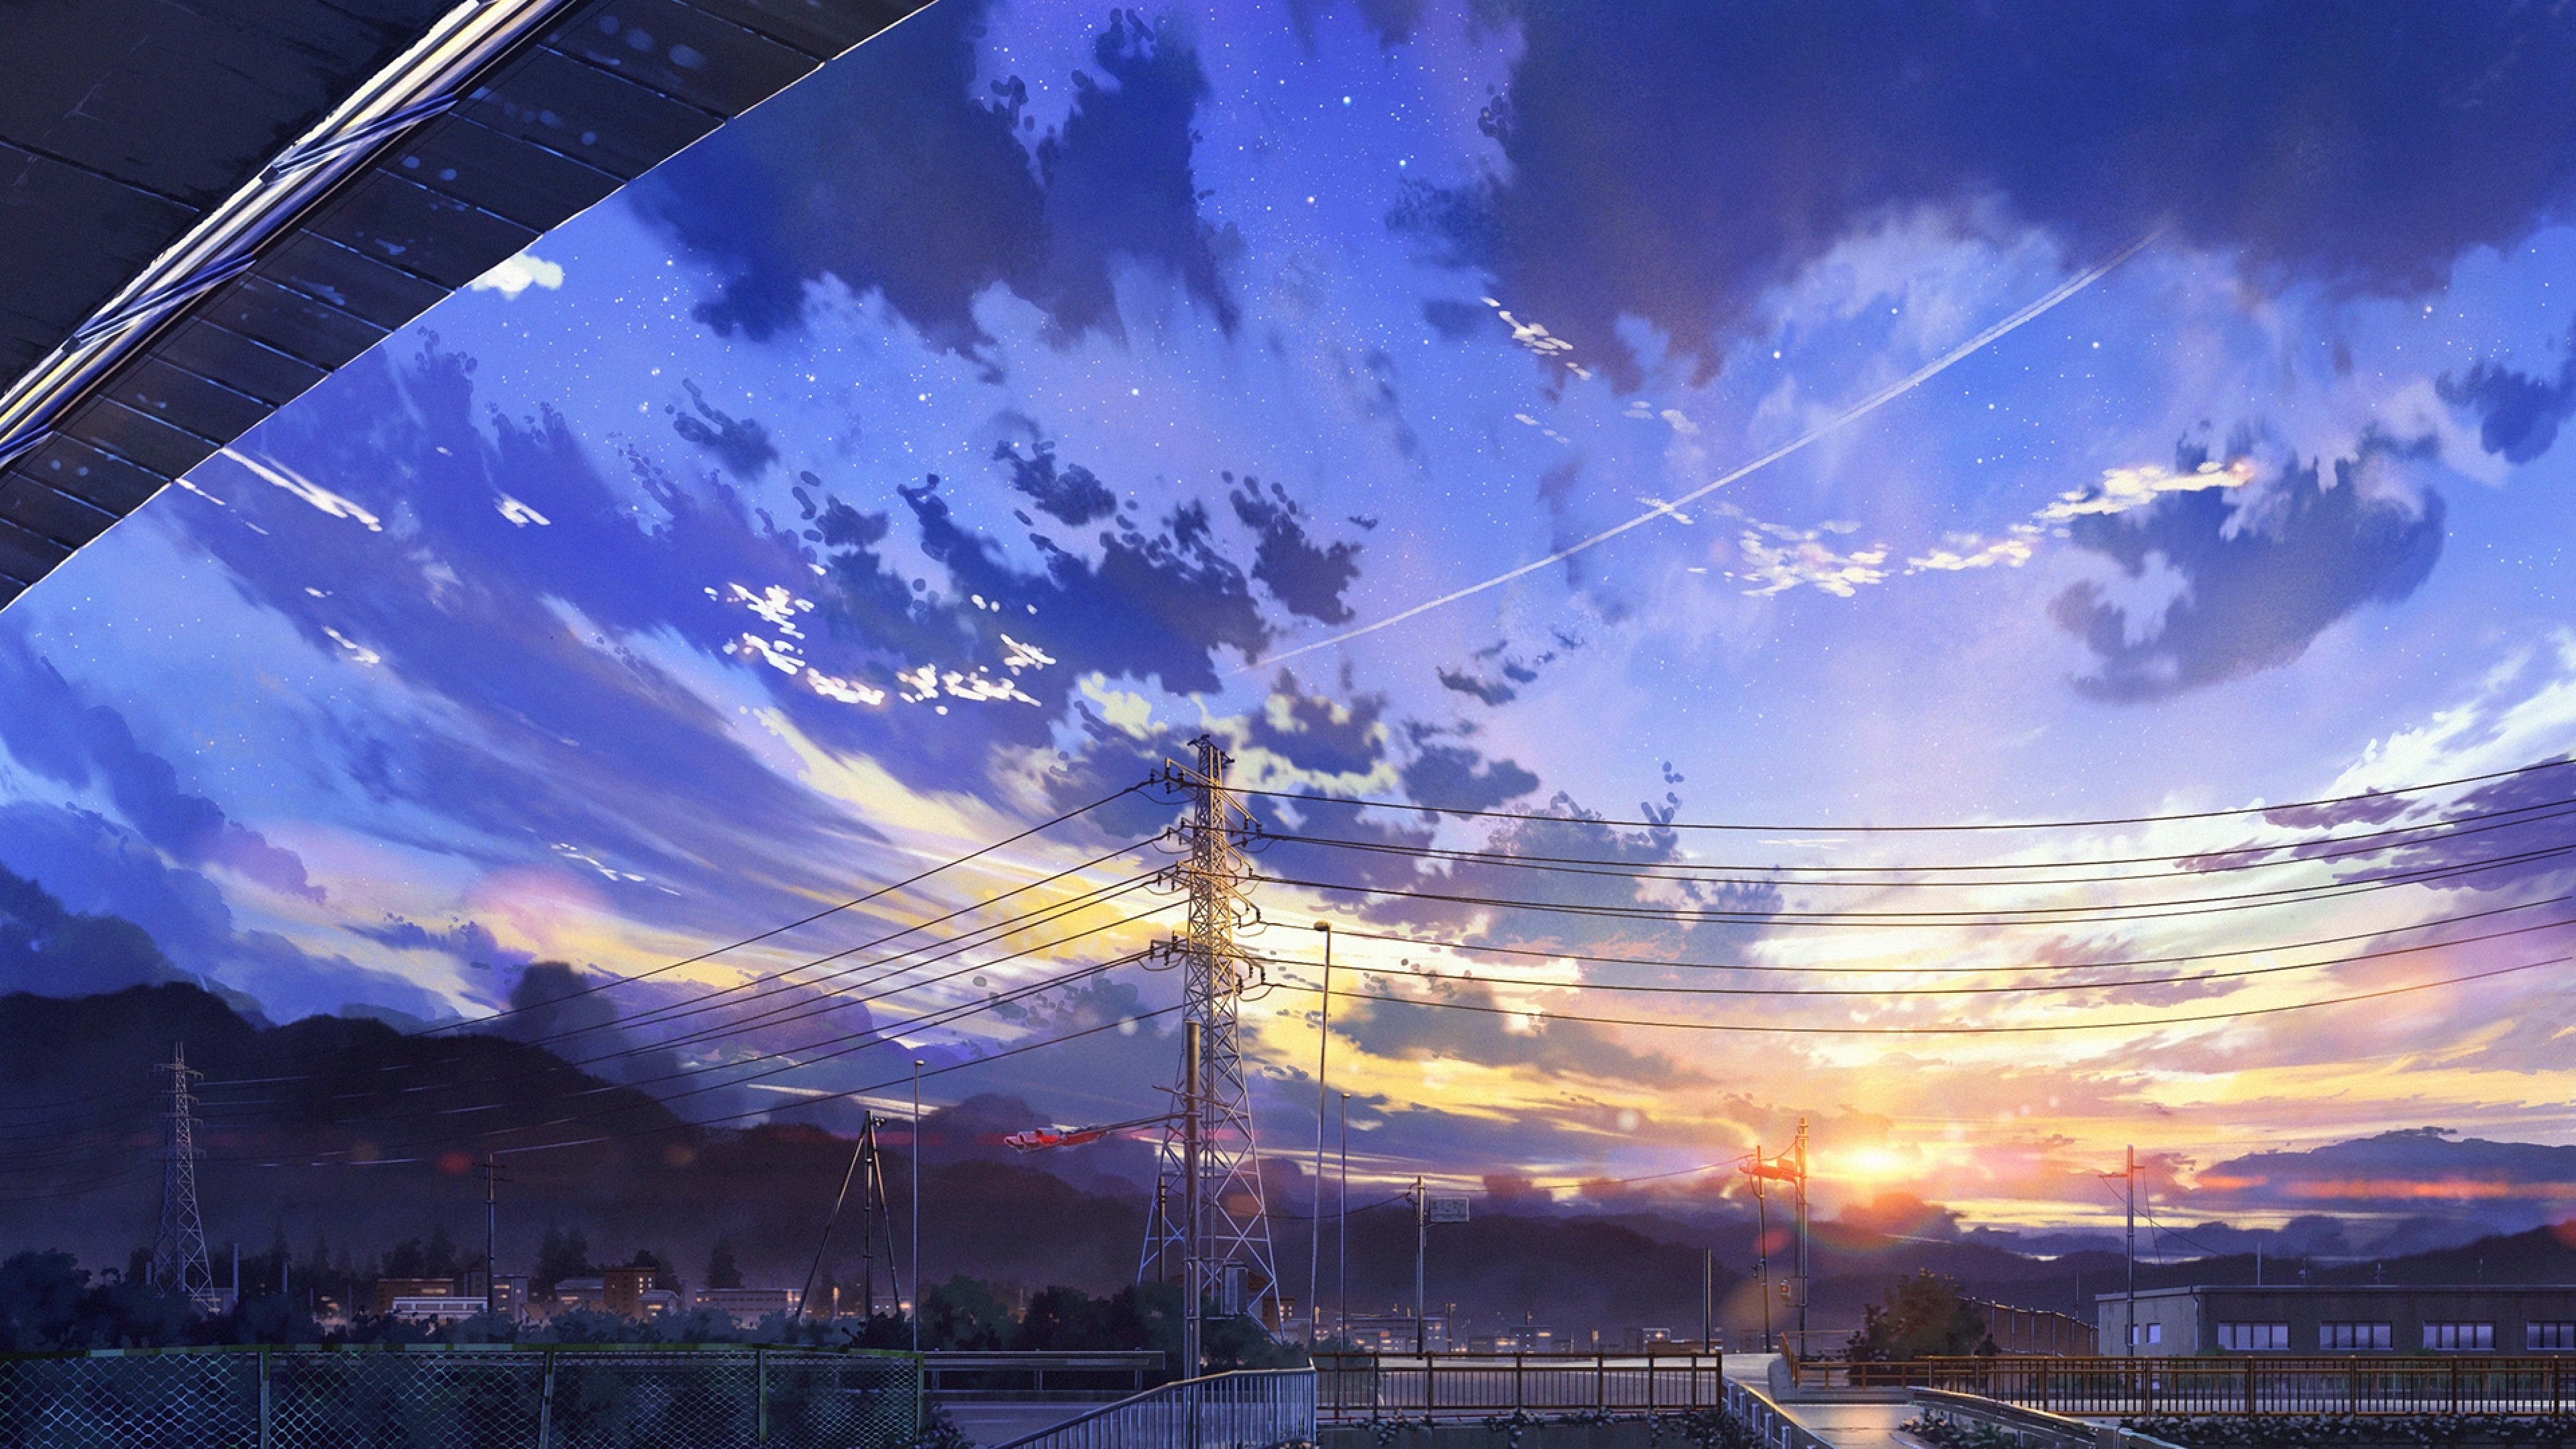 190+ Anime Landscape HD Wallpapers and Backgrounds